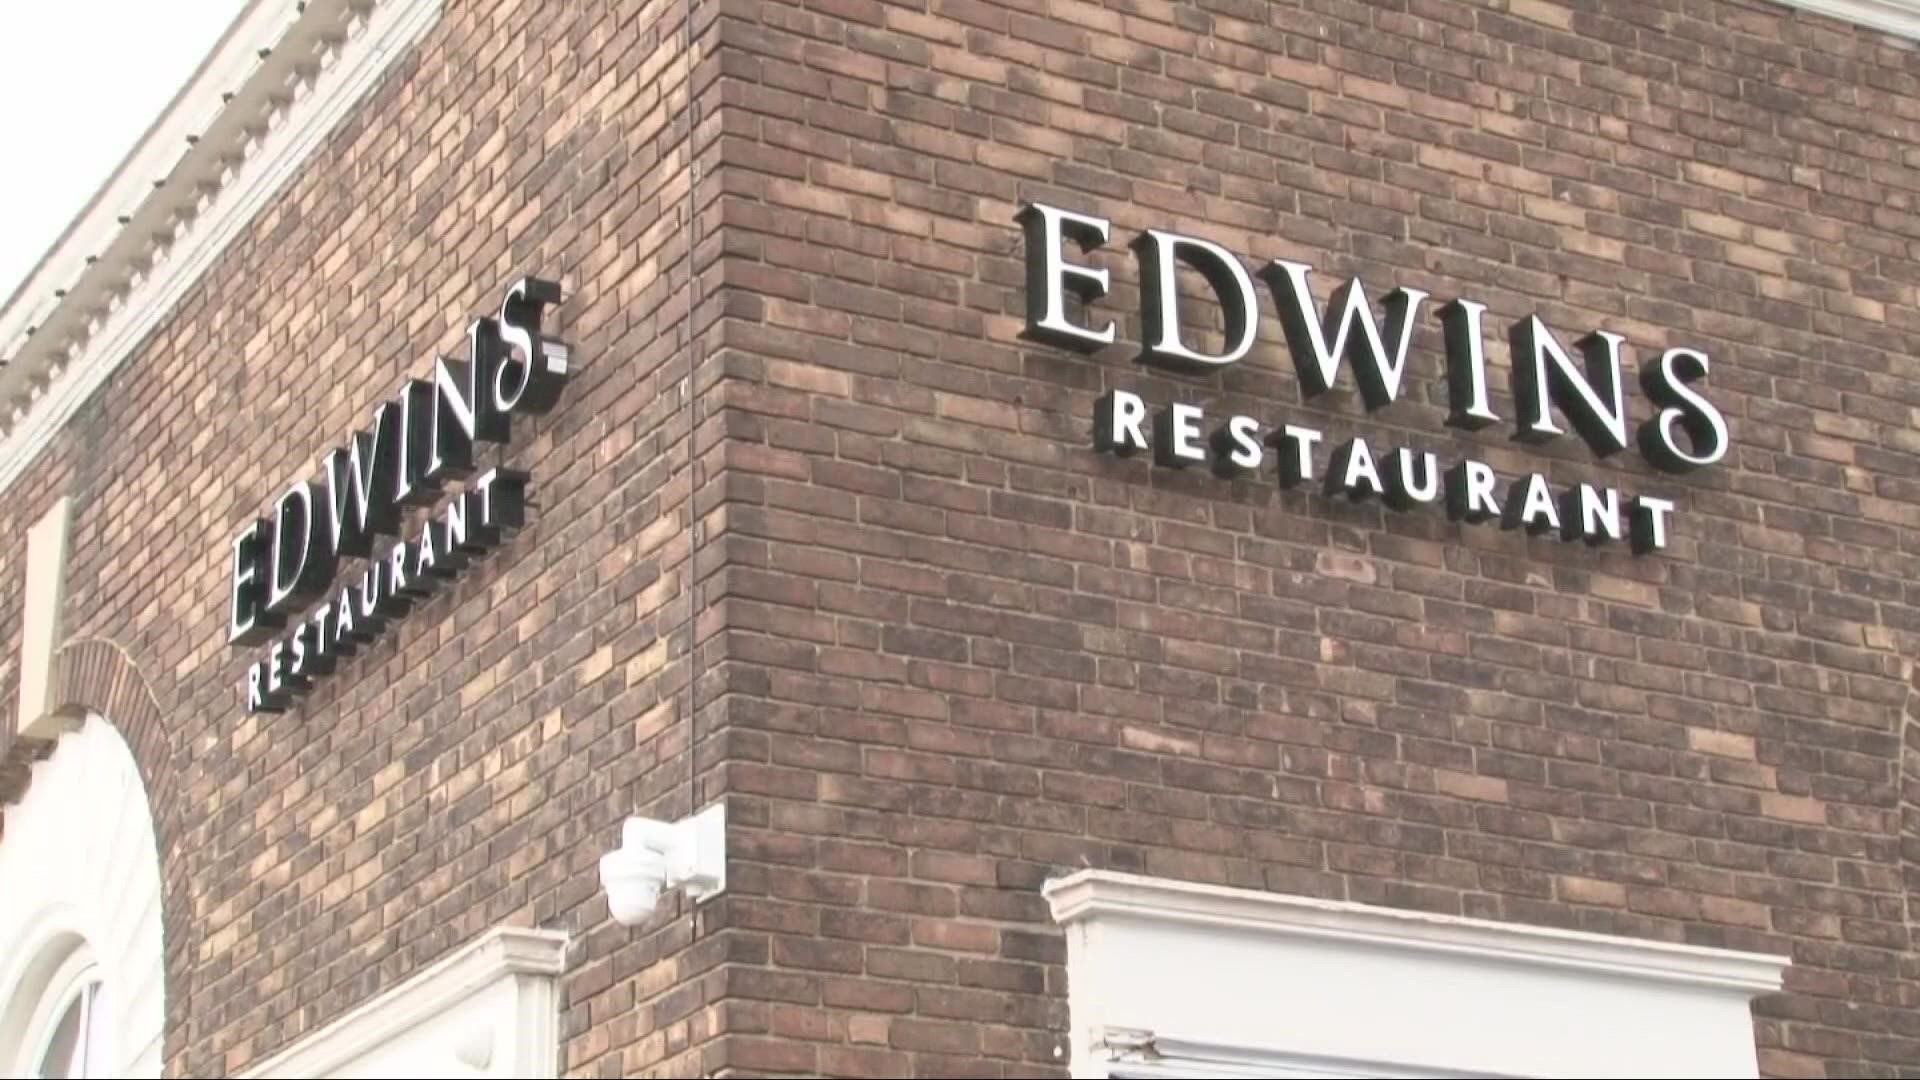 Many in the leadership and restaurant institute have children and are dropping out at alarming rates. EDWINS' new child care center will be free of charge.